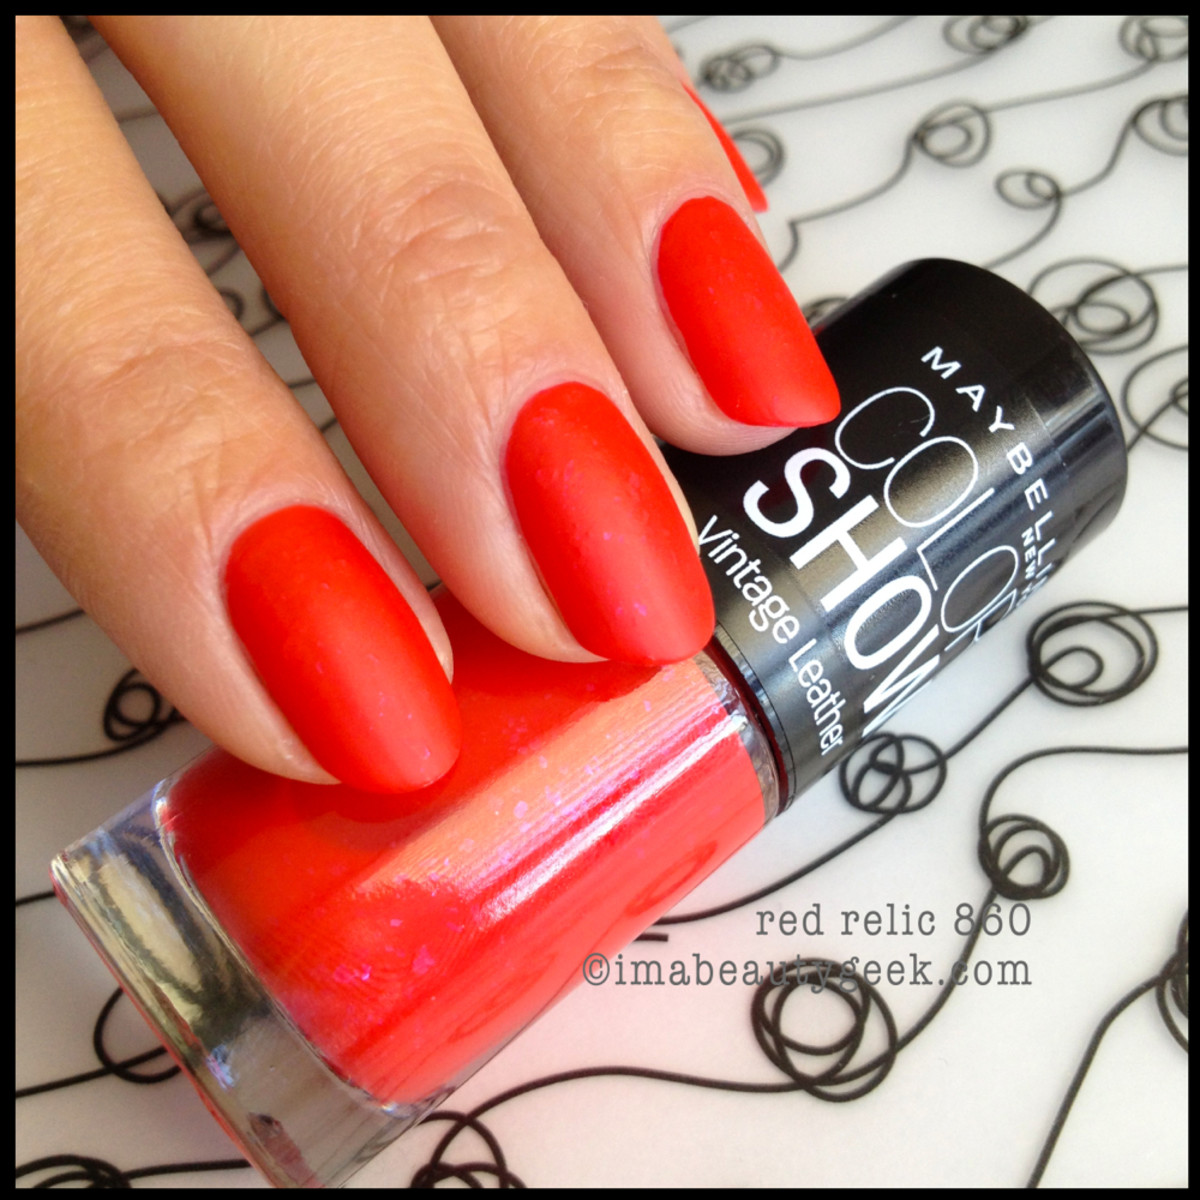 Maybelline Color Show Nail Polish in Coral Craze (211) - Review, Photos,  NOTD, Price in India - Crazy Beauty Land